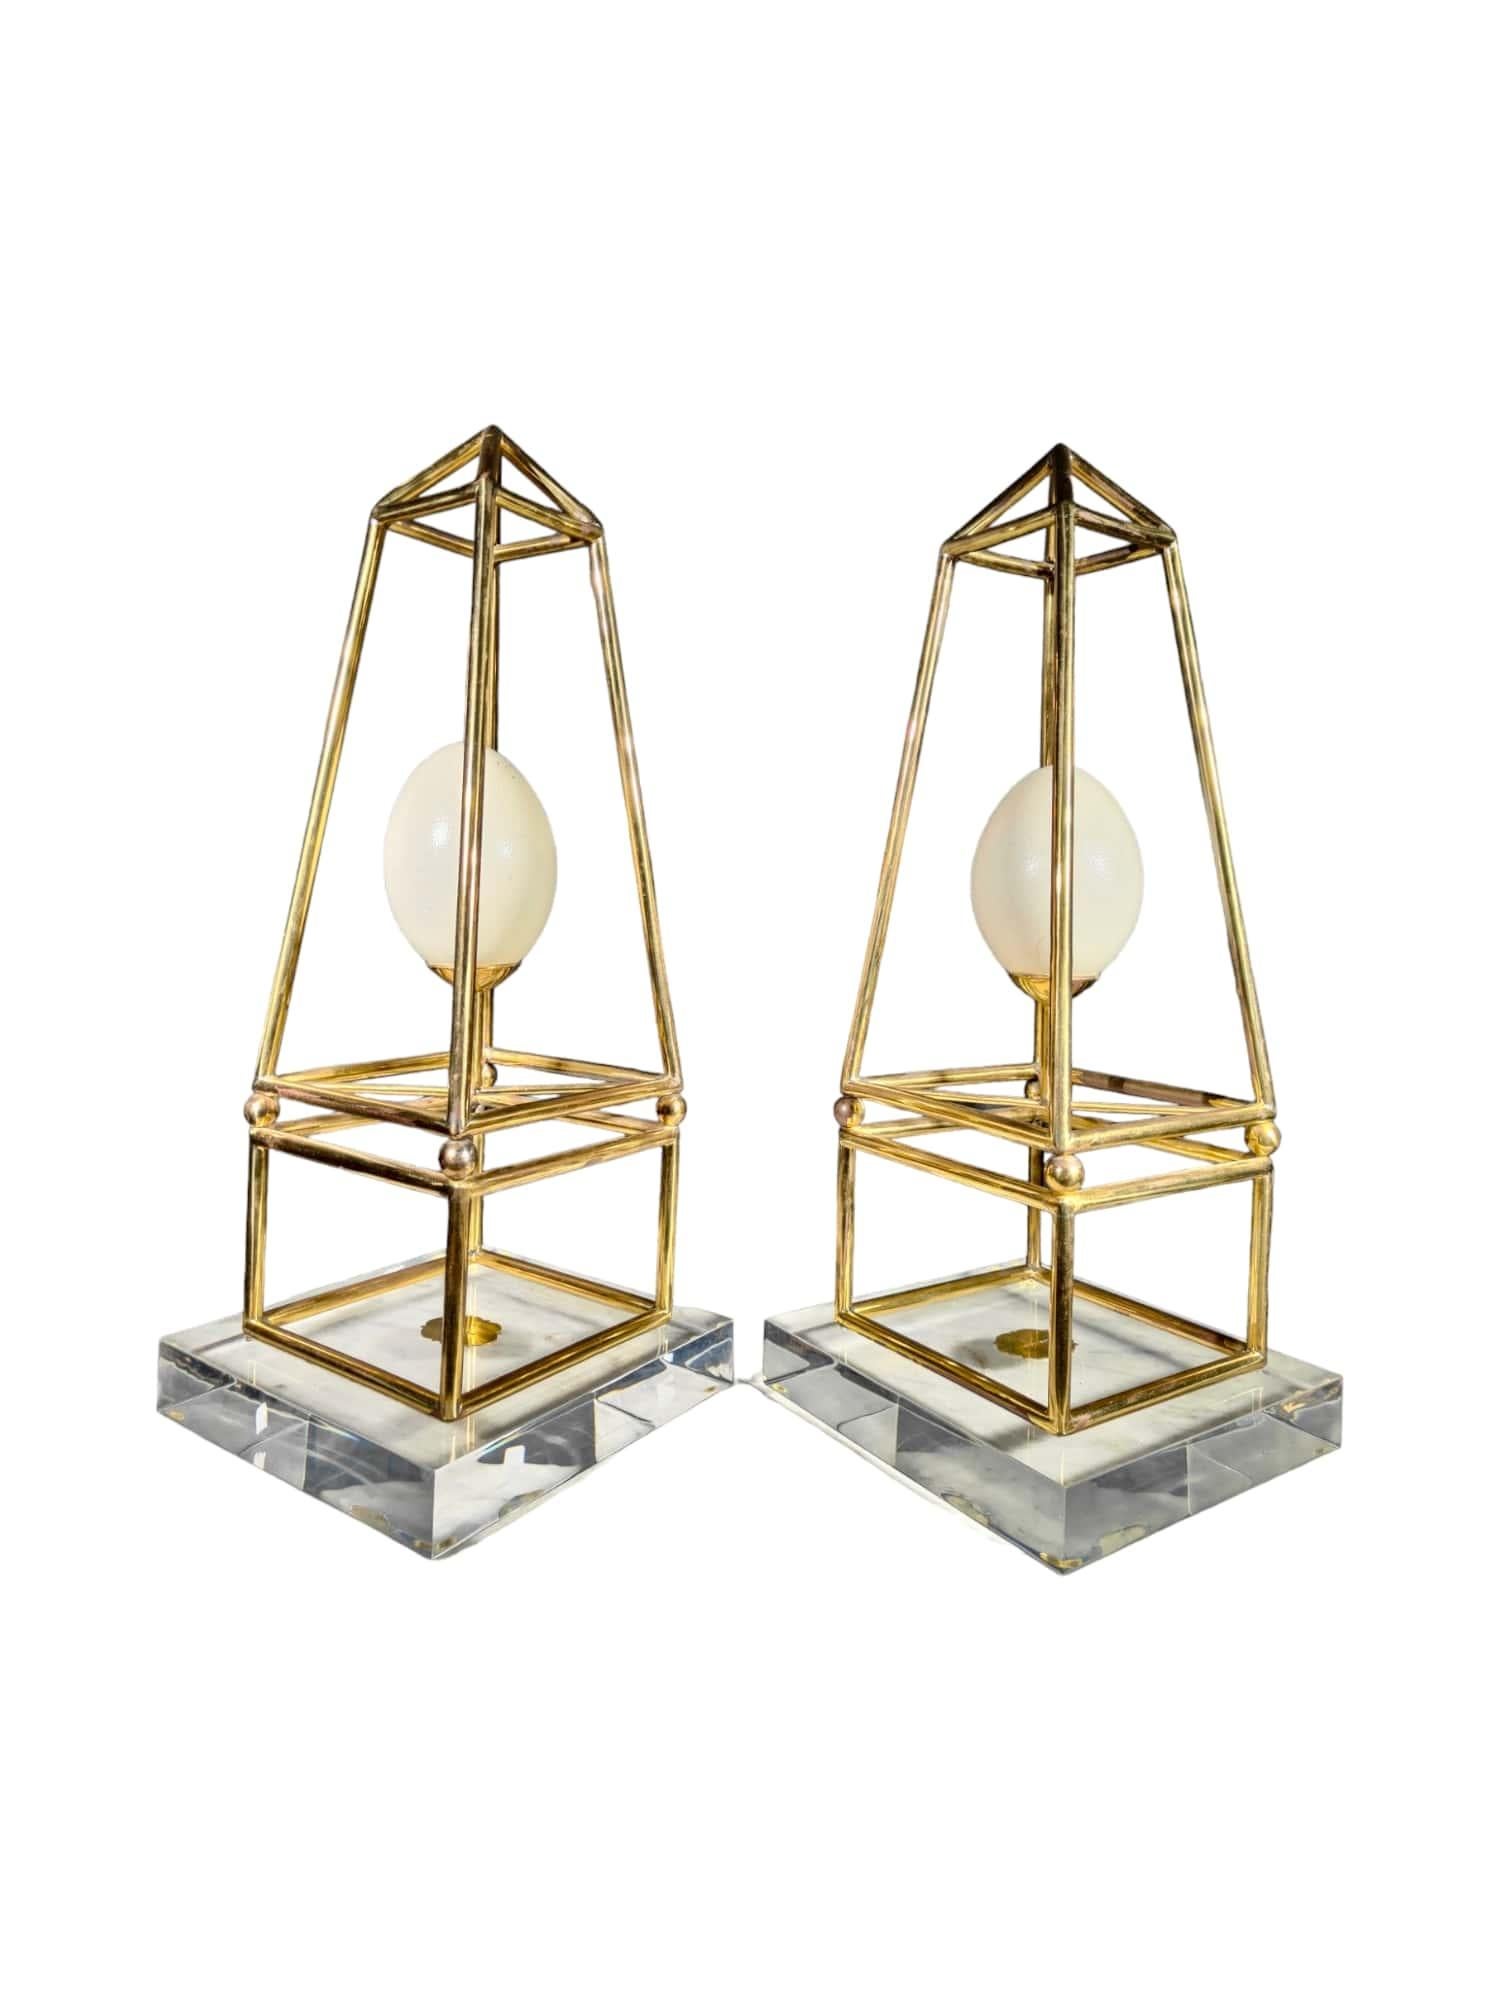 Anthony Redmile Bronze Obelisks - Elegant Pair with a Modern Luxe Touch For Sale 6